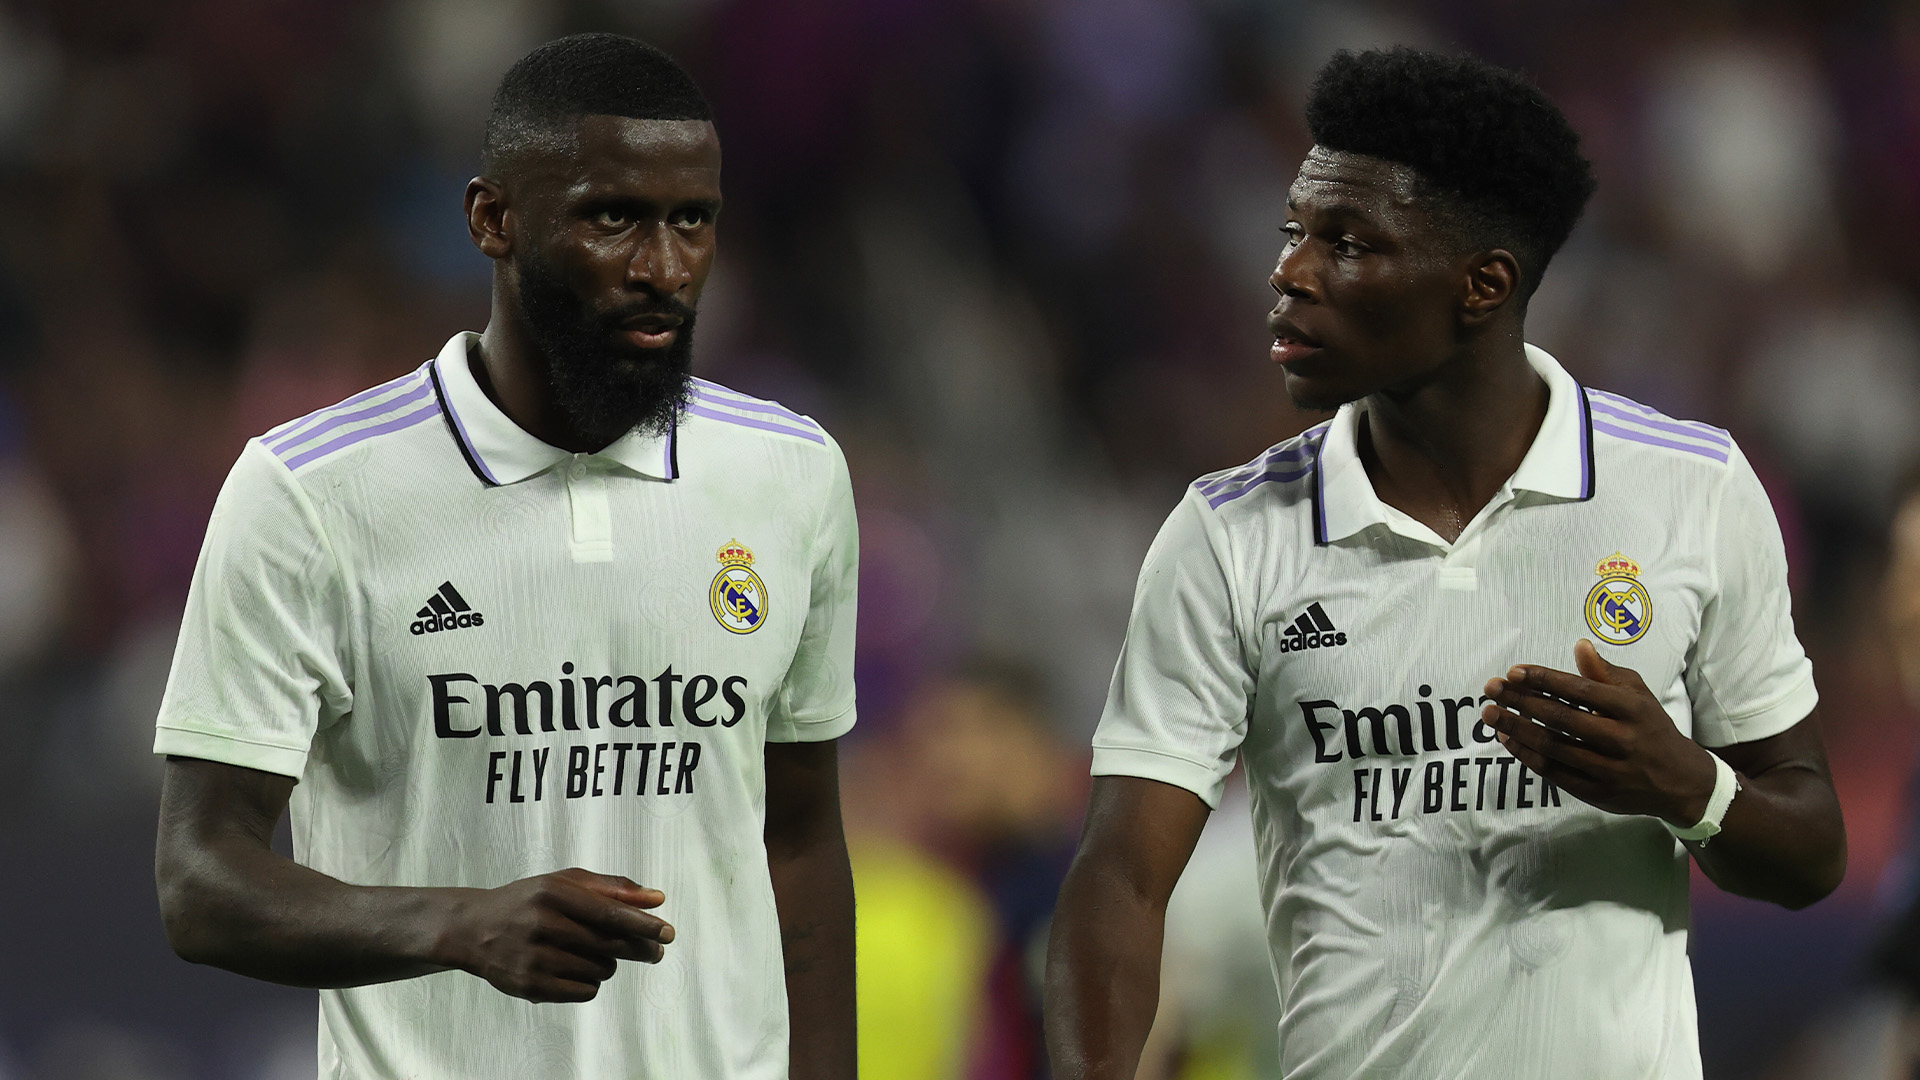 Predicted XIs Villarreal-Real Madrid: Antonio Rudiger to be dropped by Carlo Ancelotti